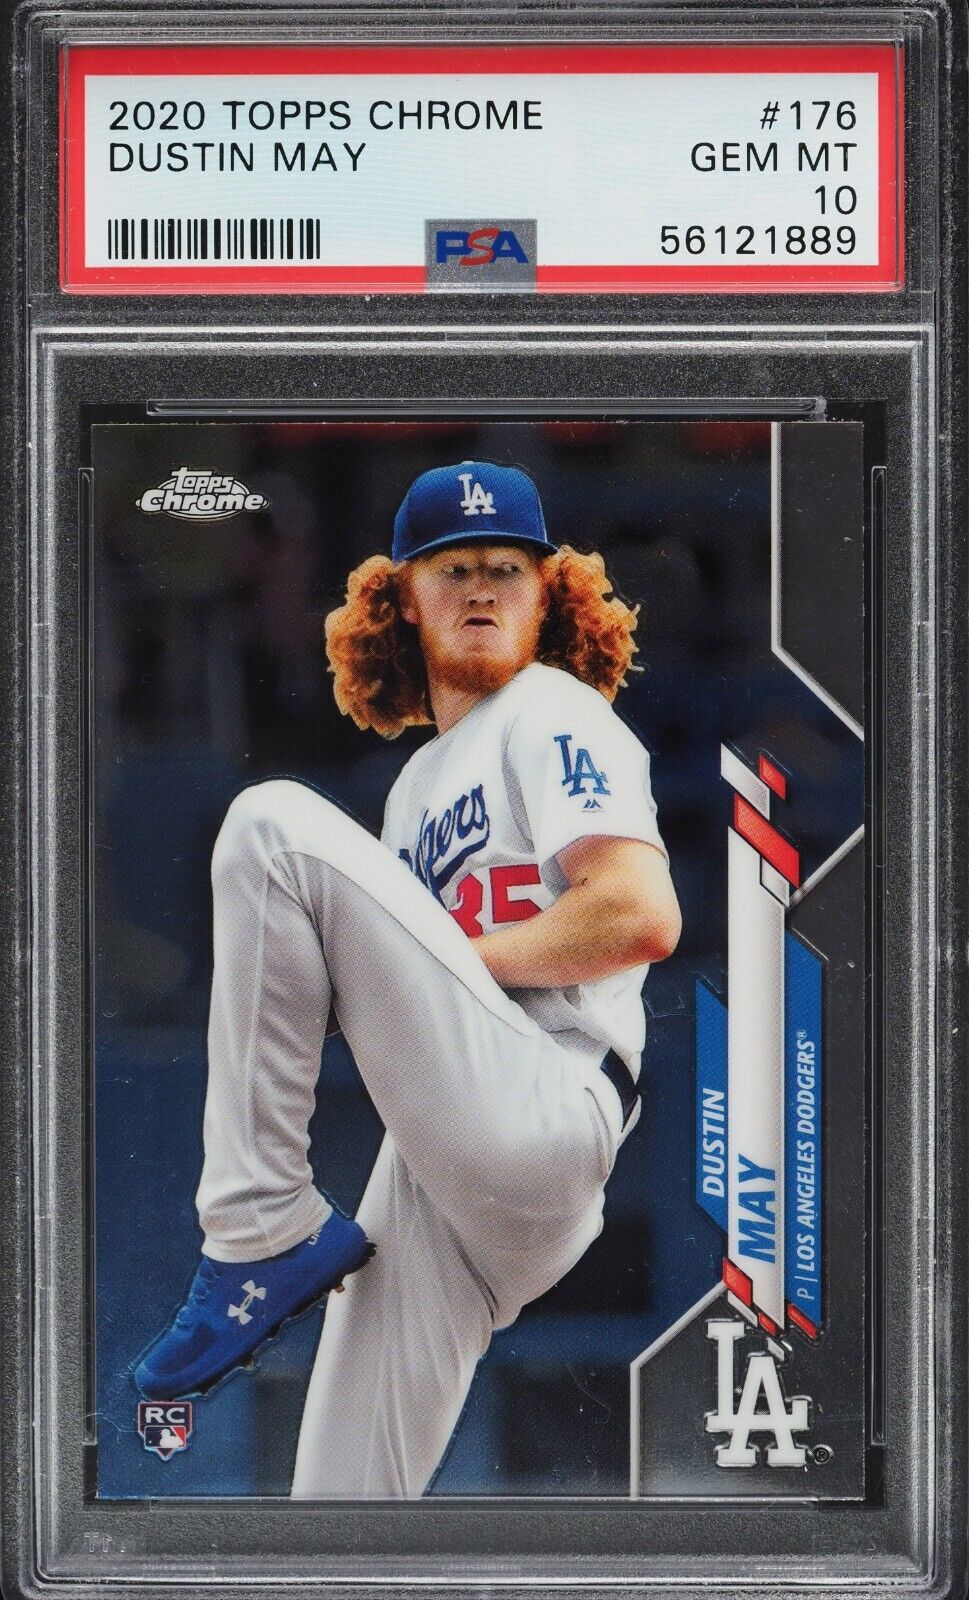 2020 Topps Chrome Baseball #176 Dustin May Rookie Card RC PSA 10 - 643-collectibles